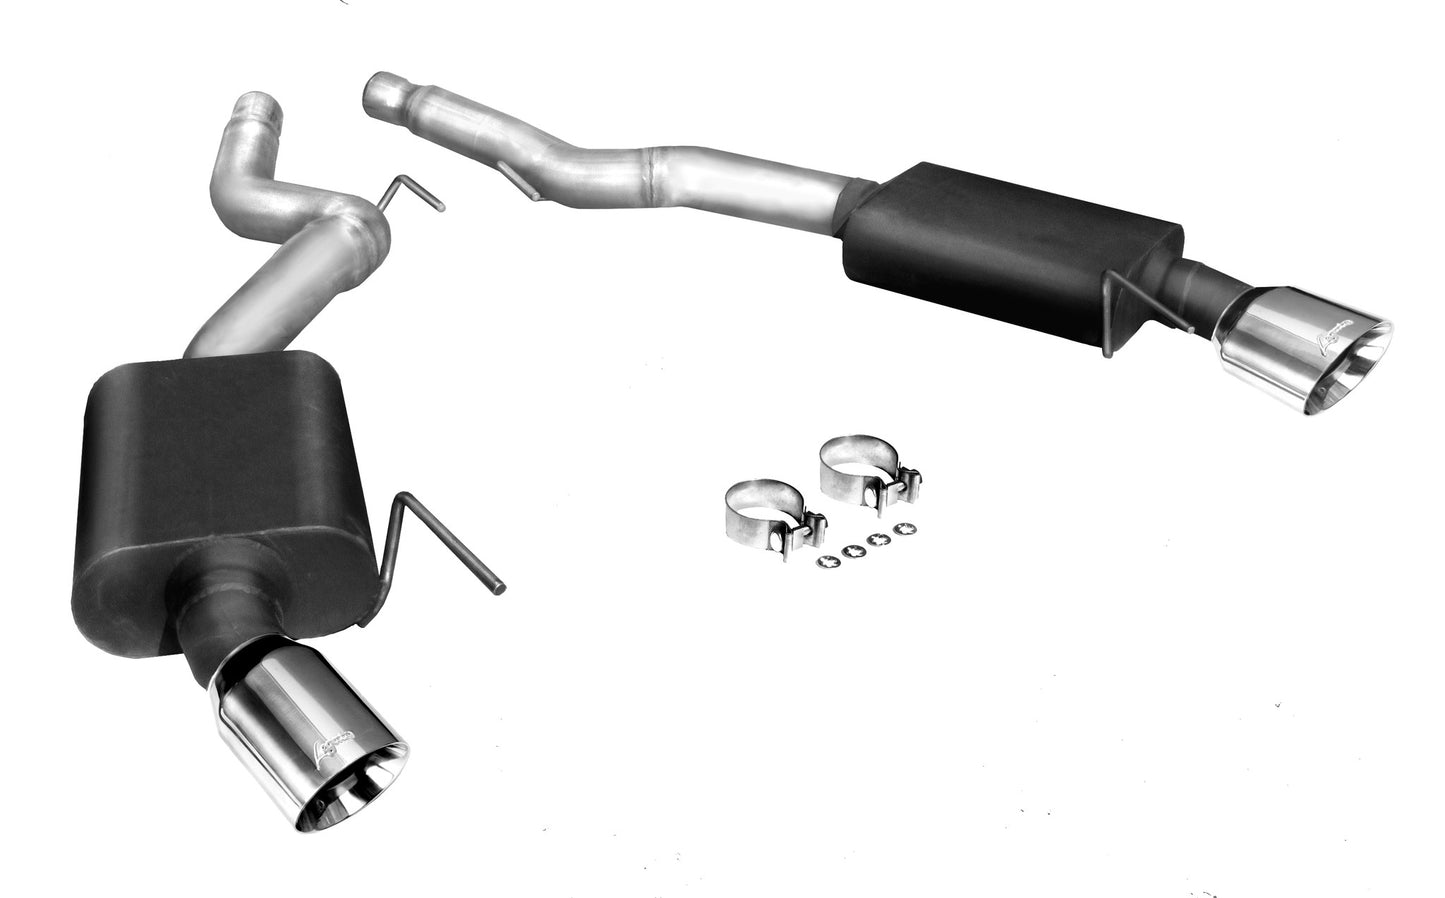 Ford Mustang GT V8 Axle Back Exhaust 2015-'17 Coupe and Convertible - Buy Online